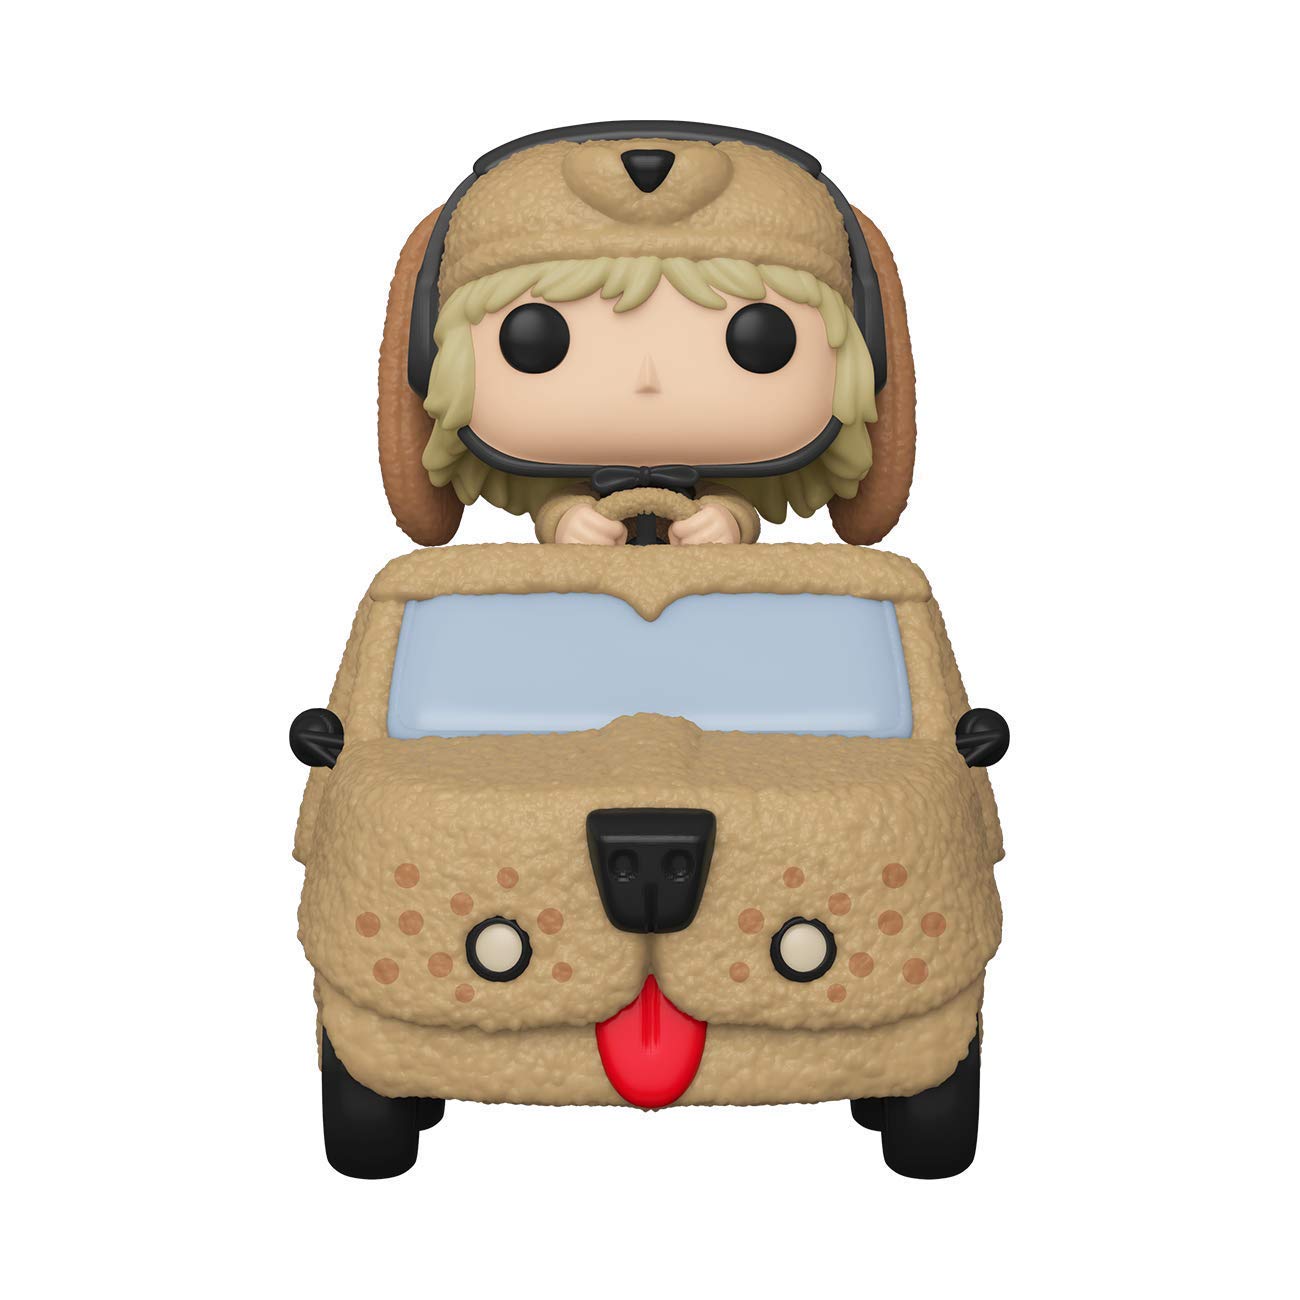 Funko POP! Rides Dumb and Dumber Harry Dunne in Mutt Cutts Van #96